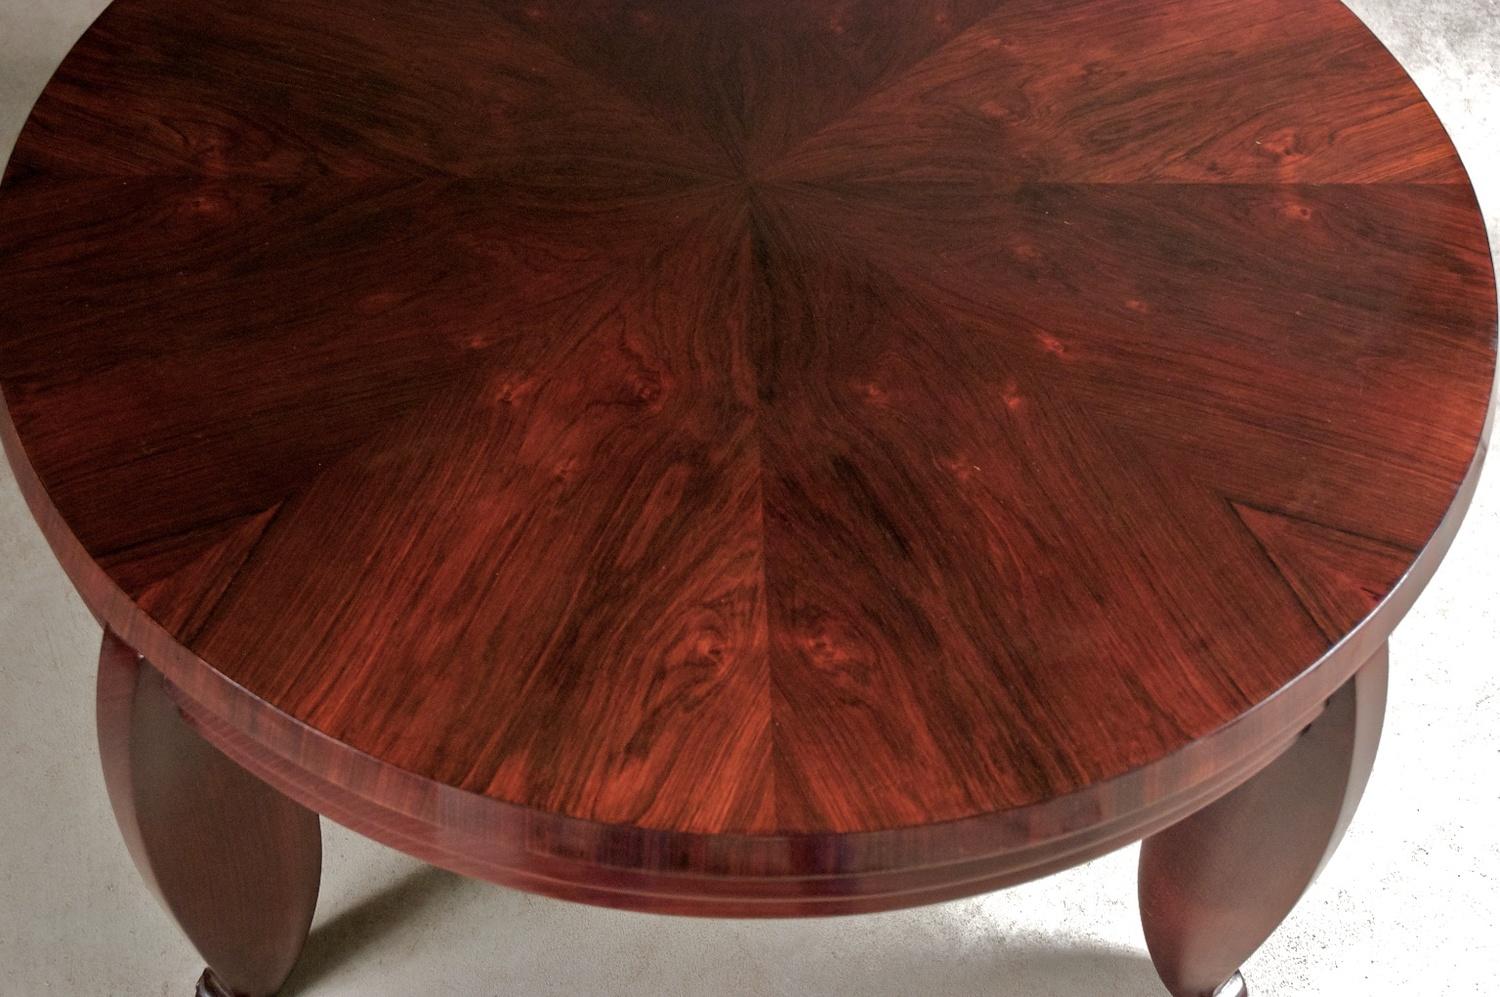 Classic French Art Deco coffee table by Maurice Dufrene, 1926, in rosewood. 40